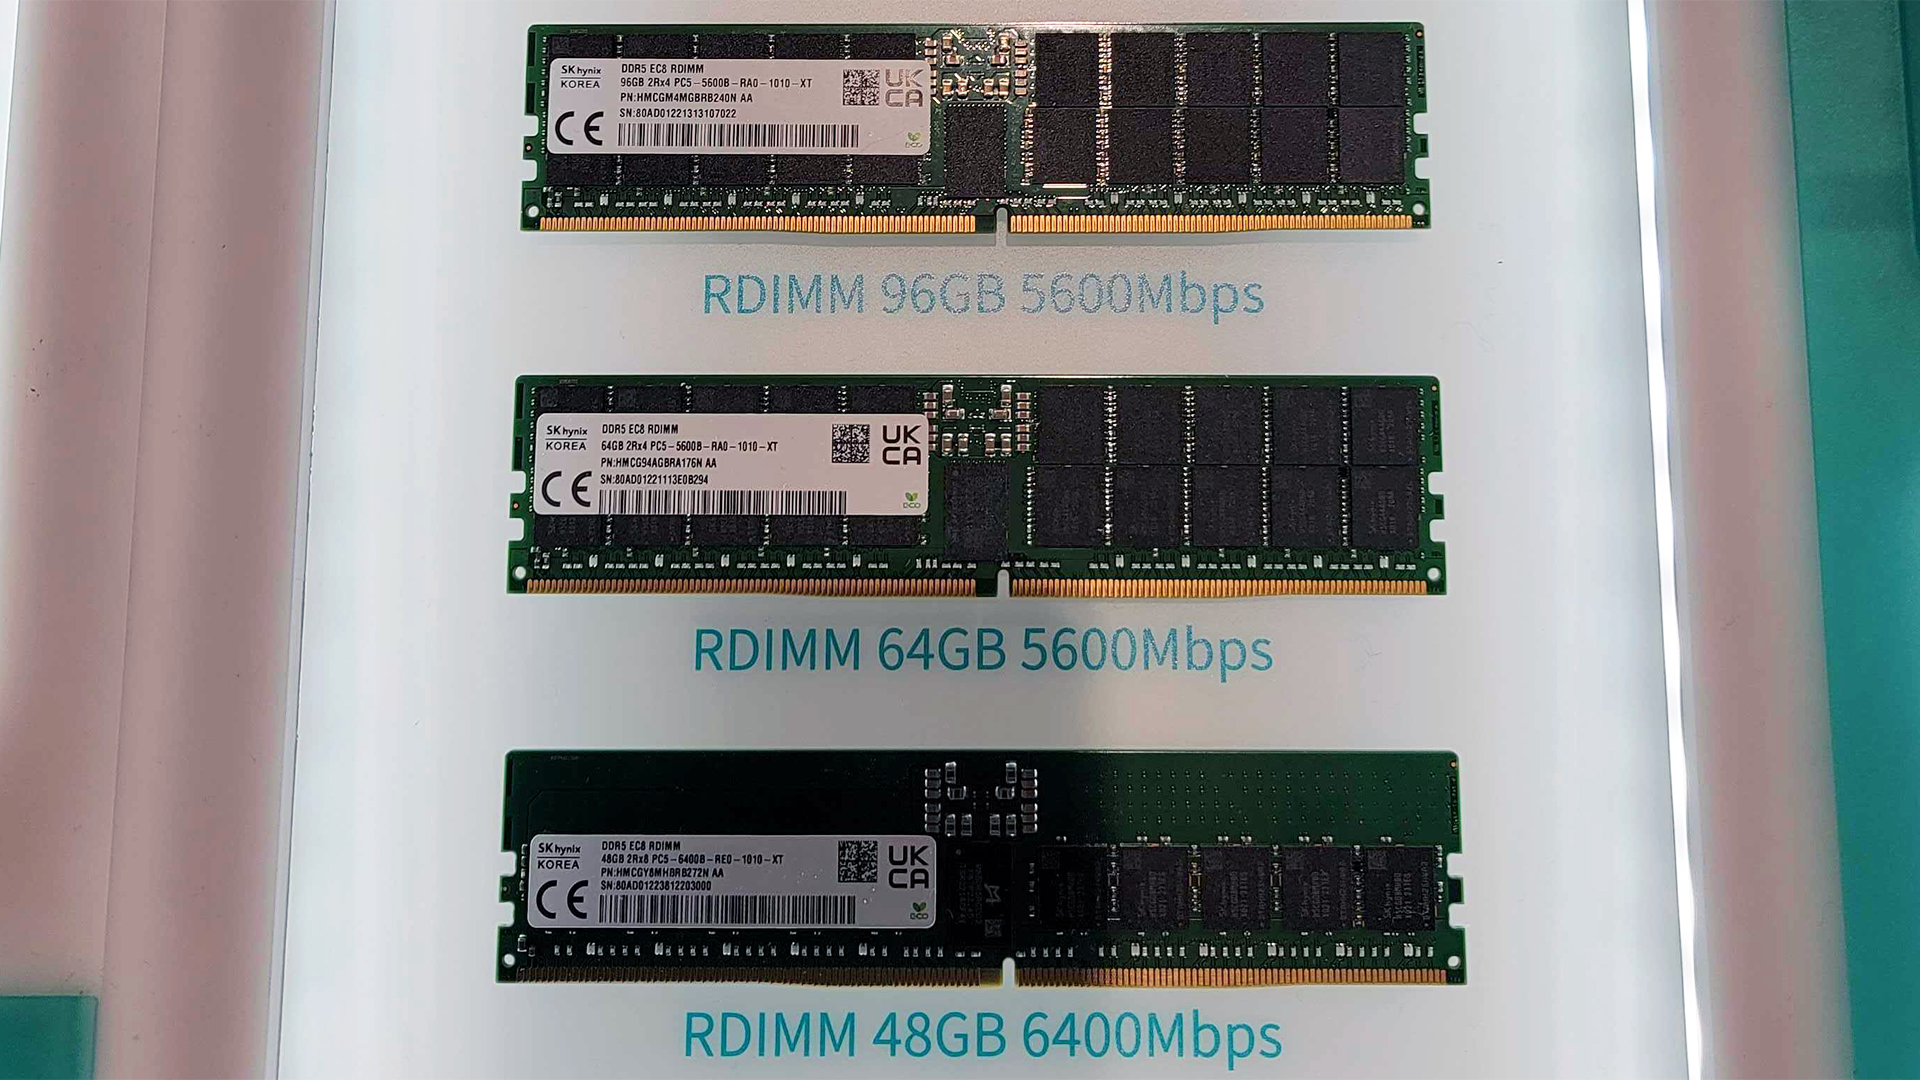 DDR5 is Coming: First 64GB DDR5-4800 Modules from SK Hynix